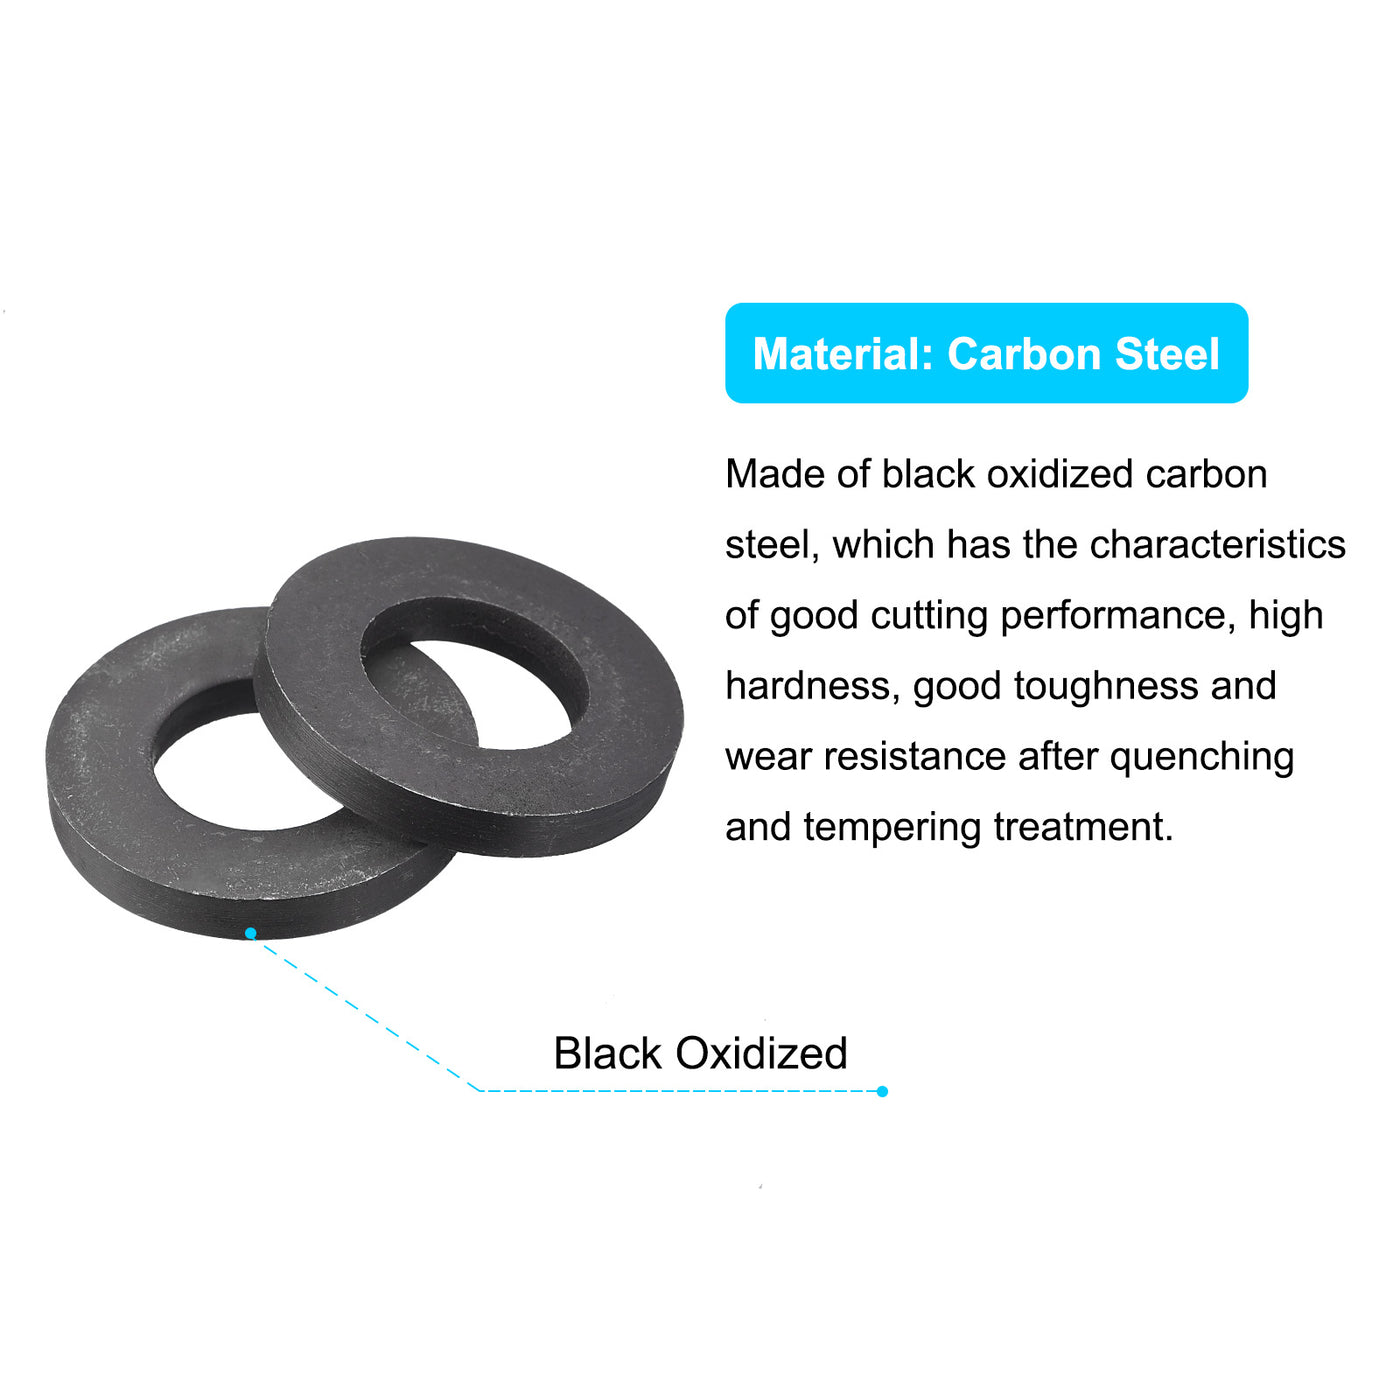 uxcell Uxcell M20 Carbon Steel Flat Washer 5pcs 20.5x40x6mm Grade 8.8 Alloy Steel Fasteners